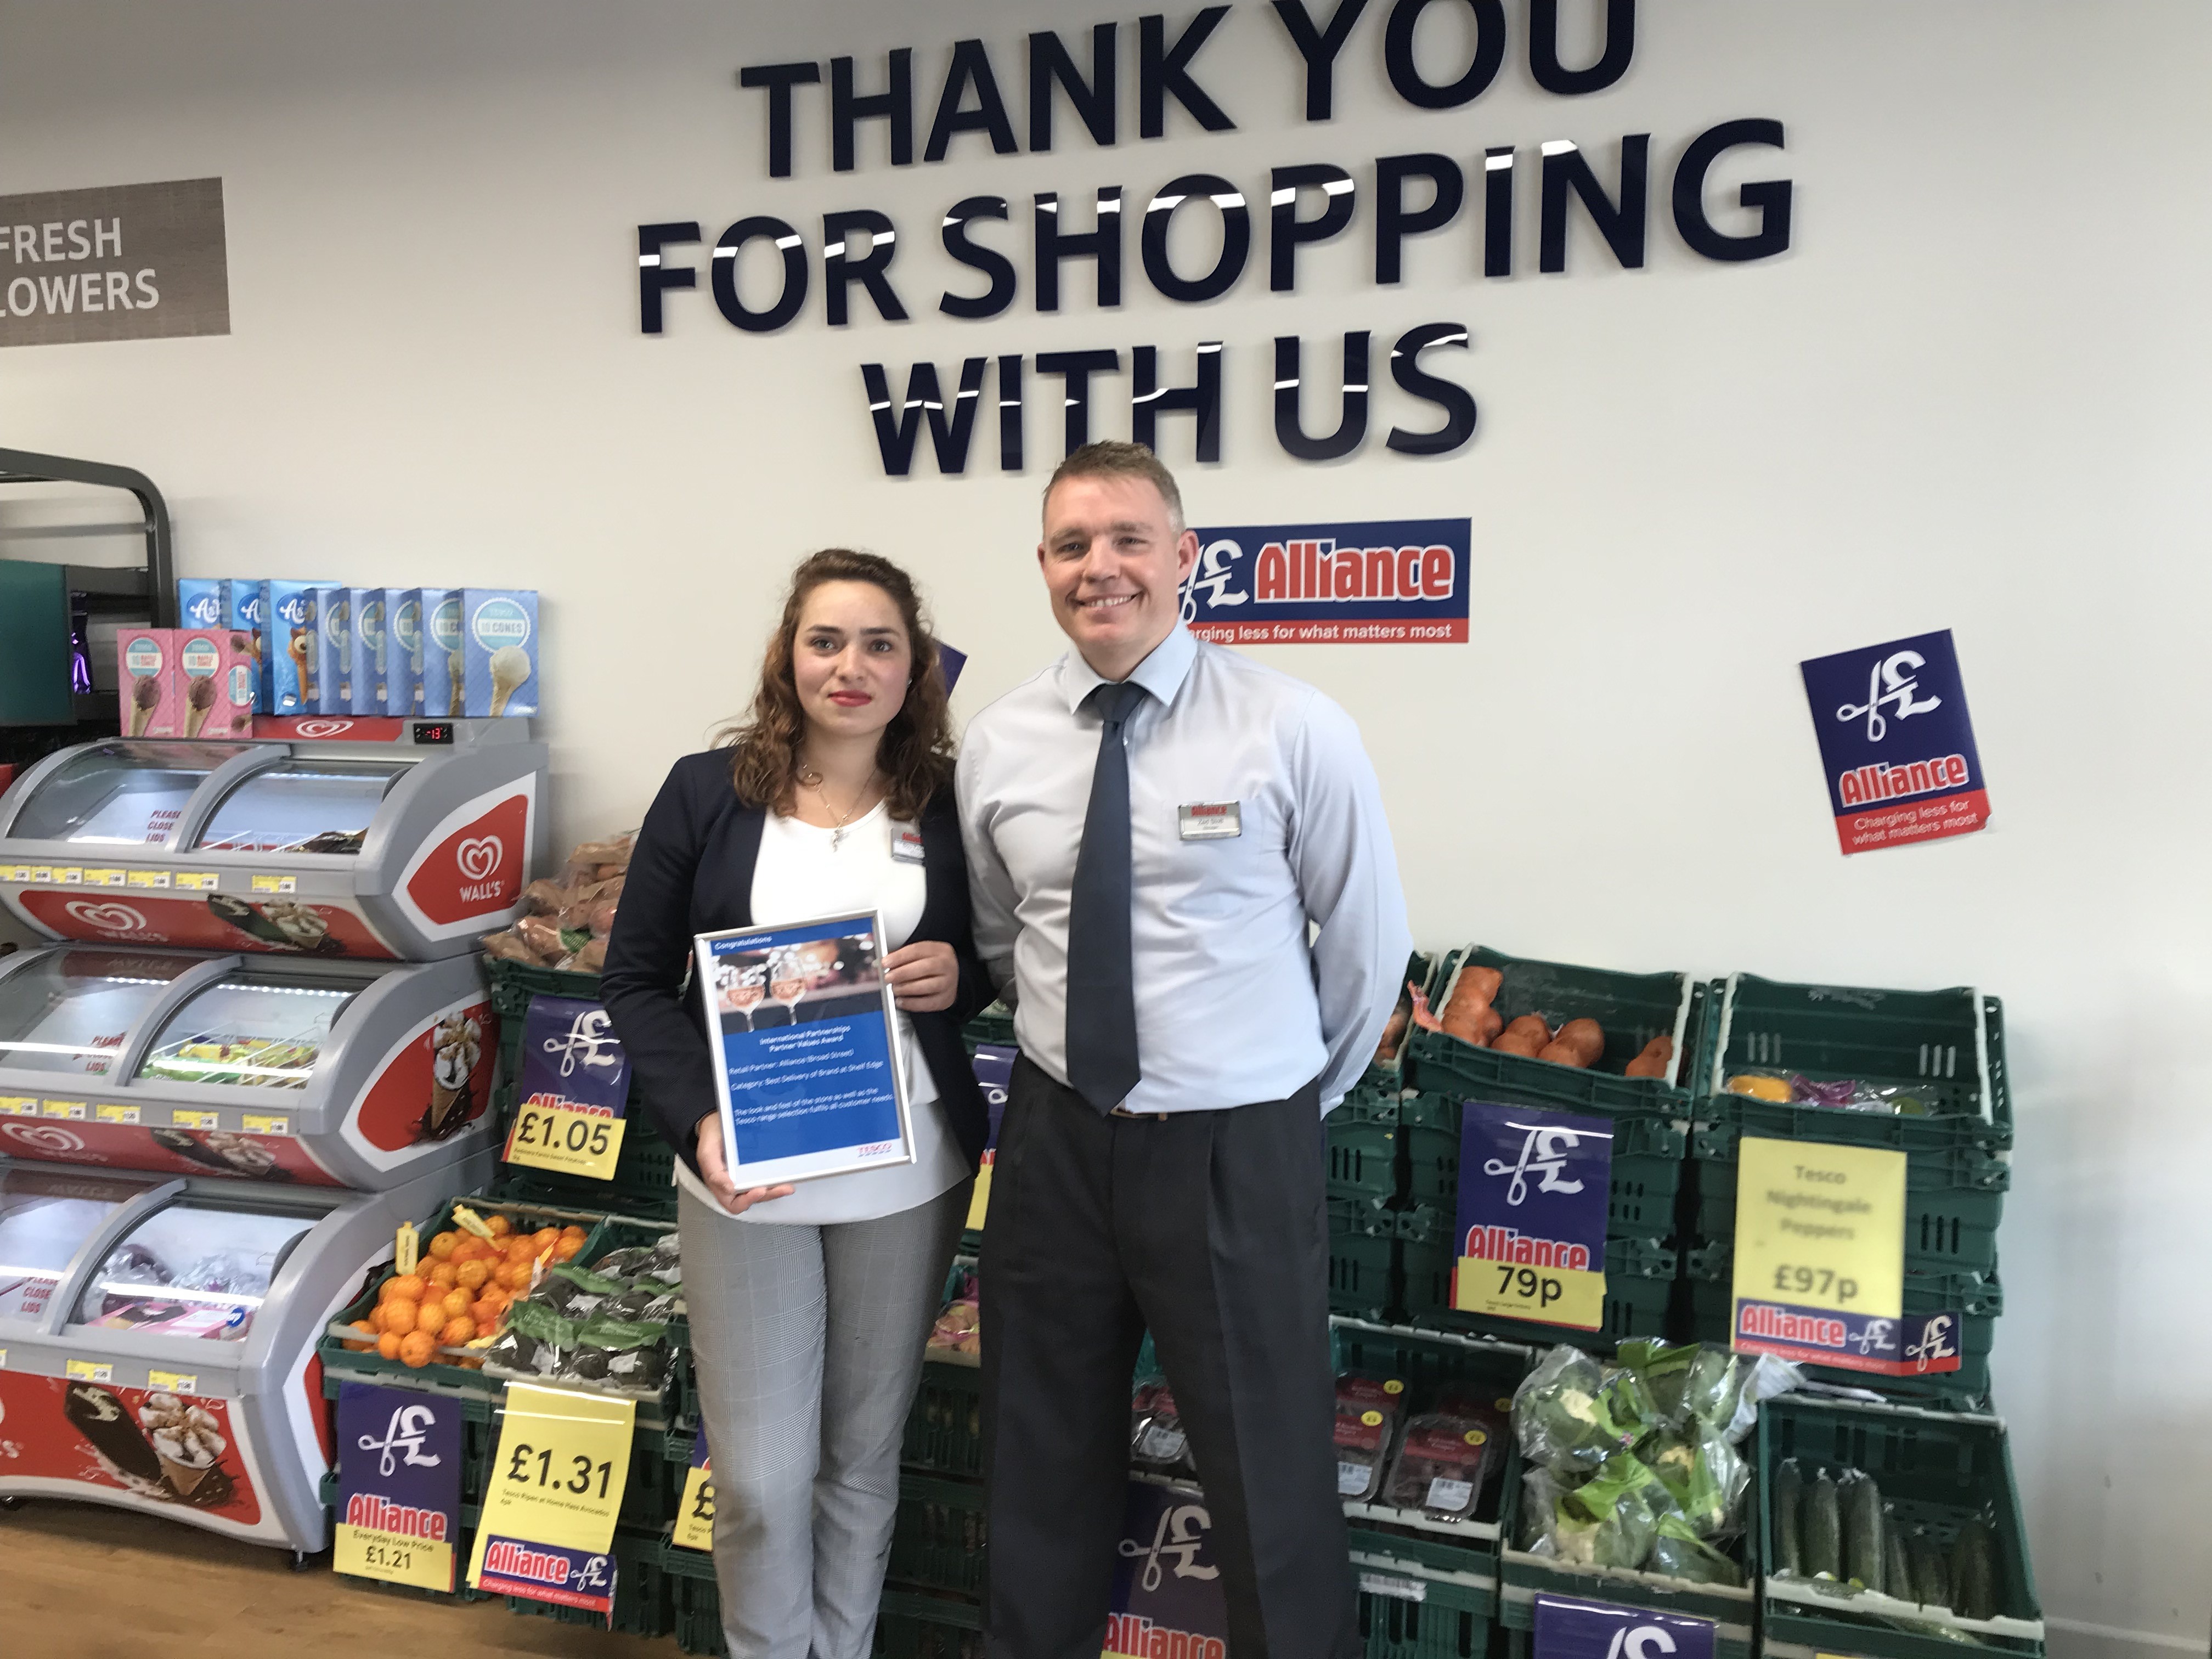 Alliance store wins national award from 